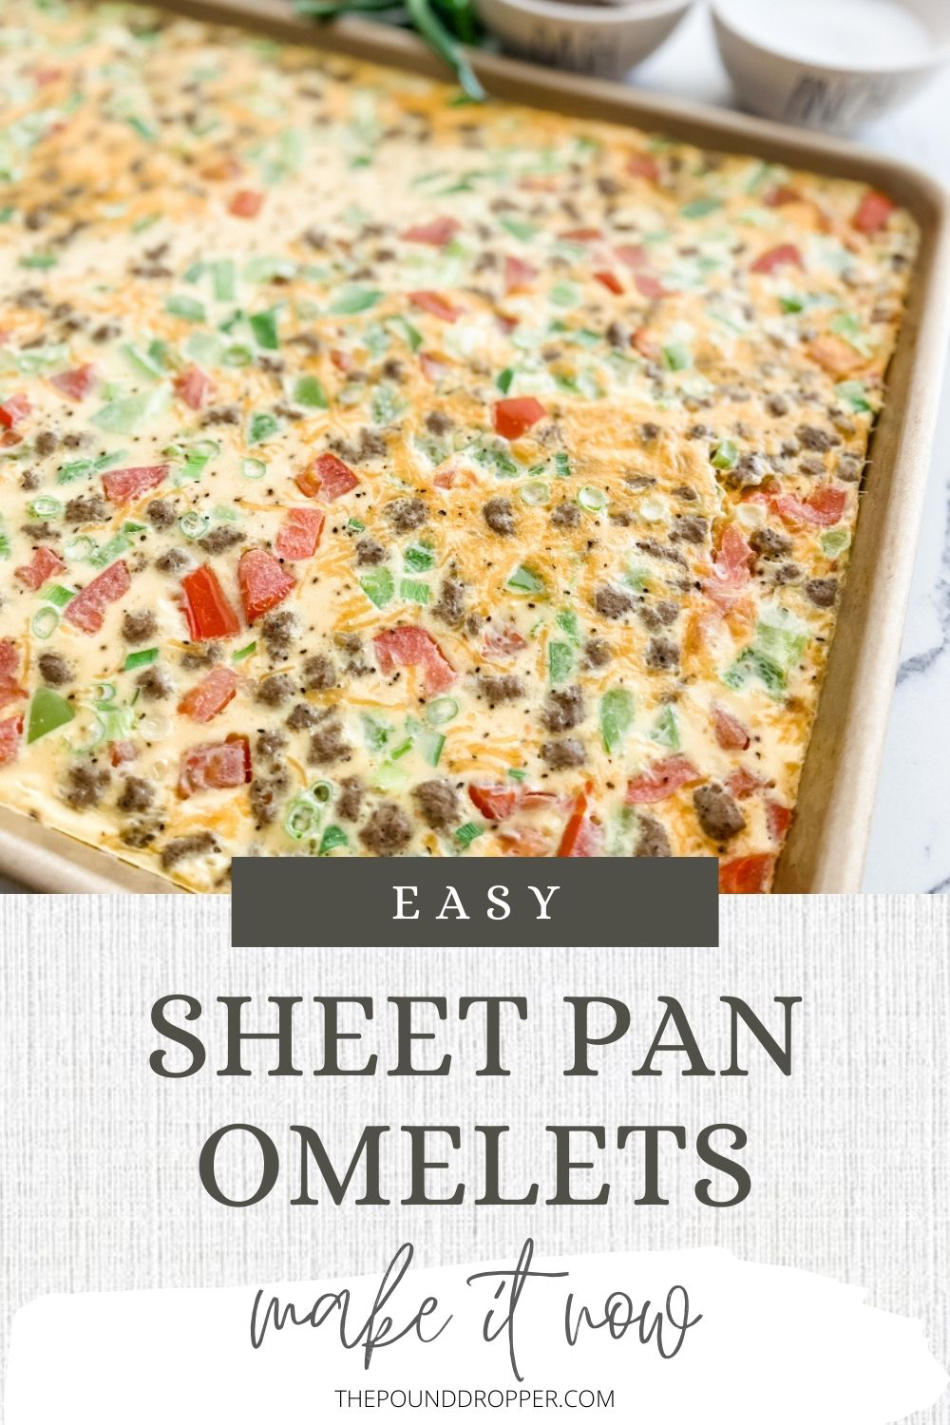 These Easy Sheet Pan Omelets are perfect for breakfasts, lunches, or for brunch-which will feed a crowd. These Sheet Pan Omelets make for a great meal prep breakfast-just freeze and reheat for those busy weekend weekday mornings. via @pounddropper